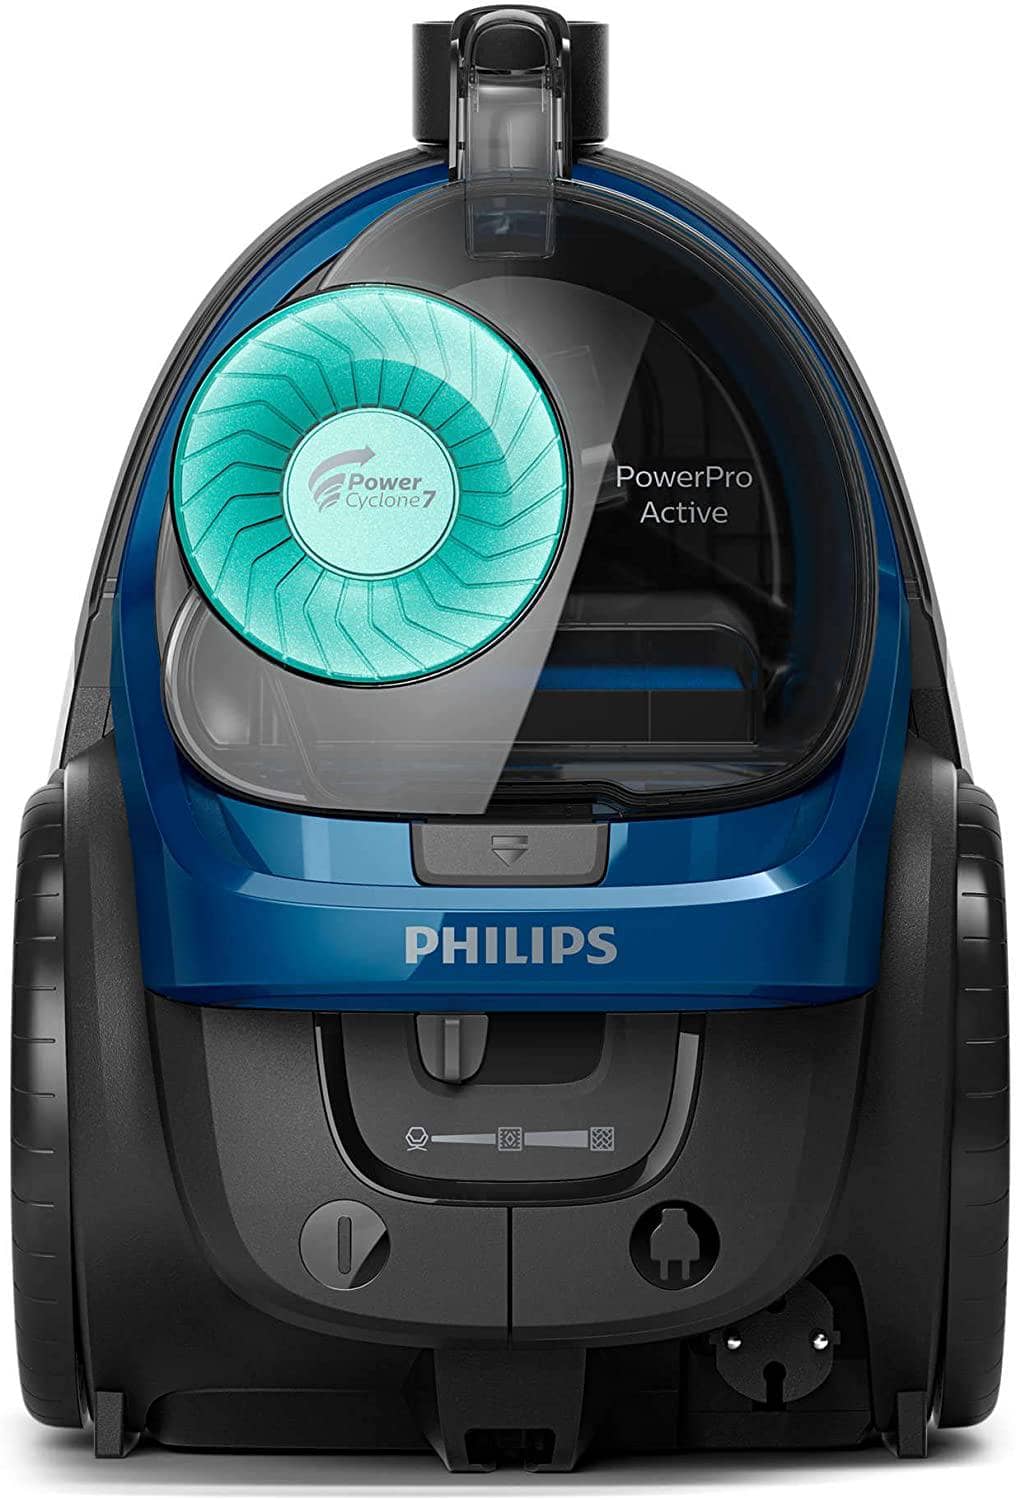 PHILIPS PowerPro Compact black: 1800W, 330W suction power, Power Cyclone 5 technology, integrated brush, HEPA filter, easy to empty dust bucket, 1.5L dust capacity FC9350/61. - DealYaSteal